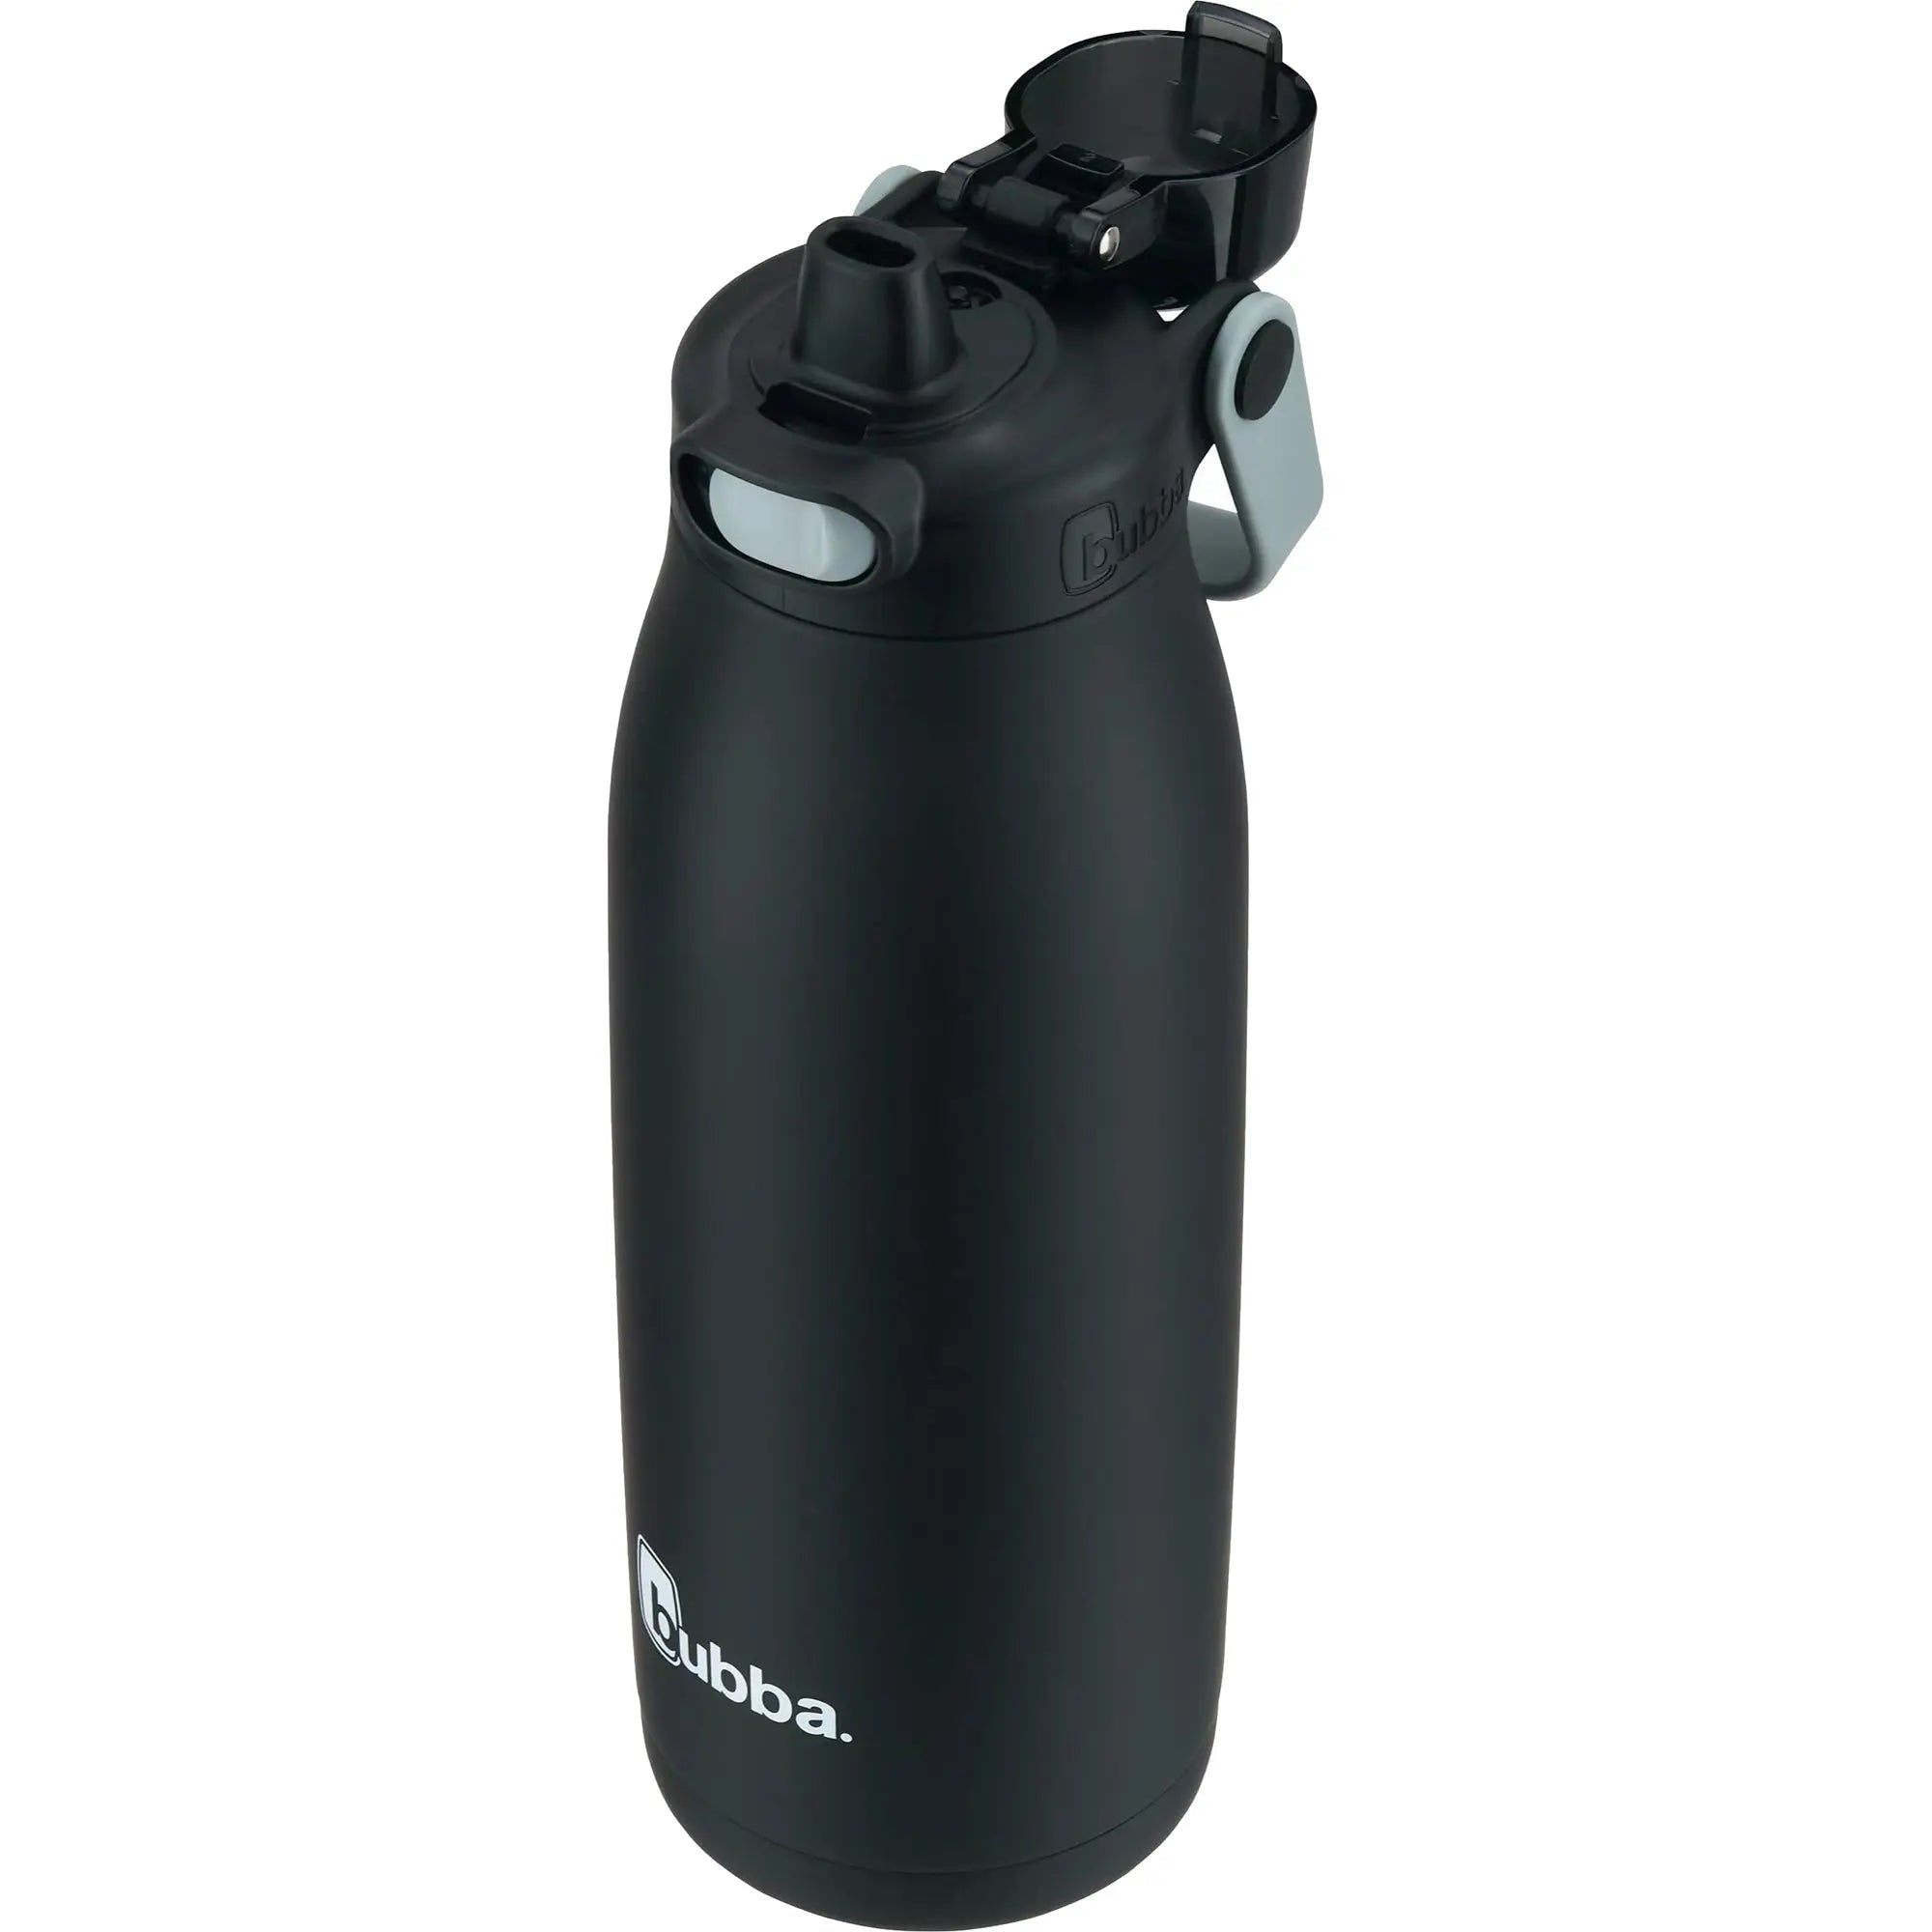 Bubba 32 oz. Radiant Vacuum Insulated Stainless Steel Water Bottle Bubba